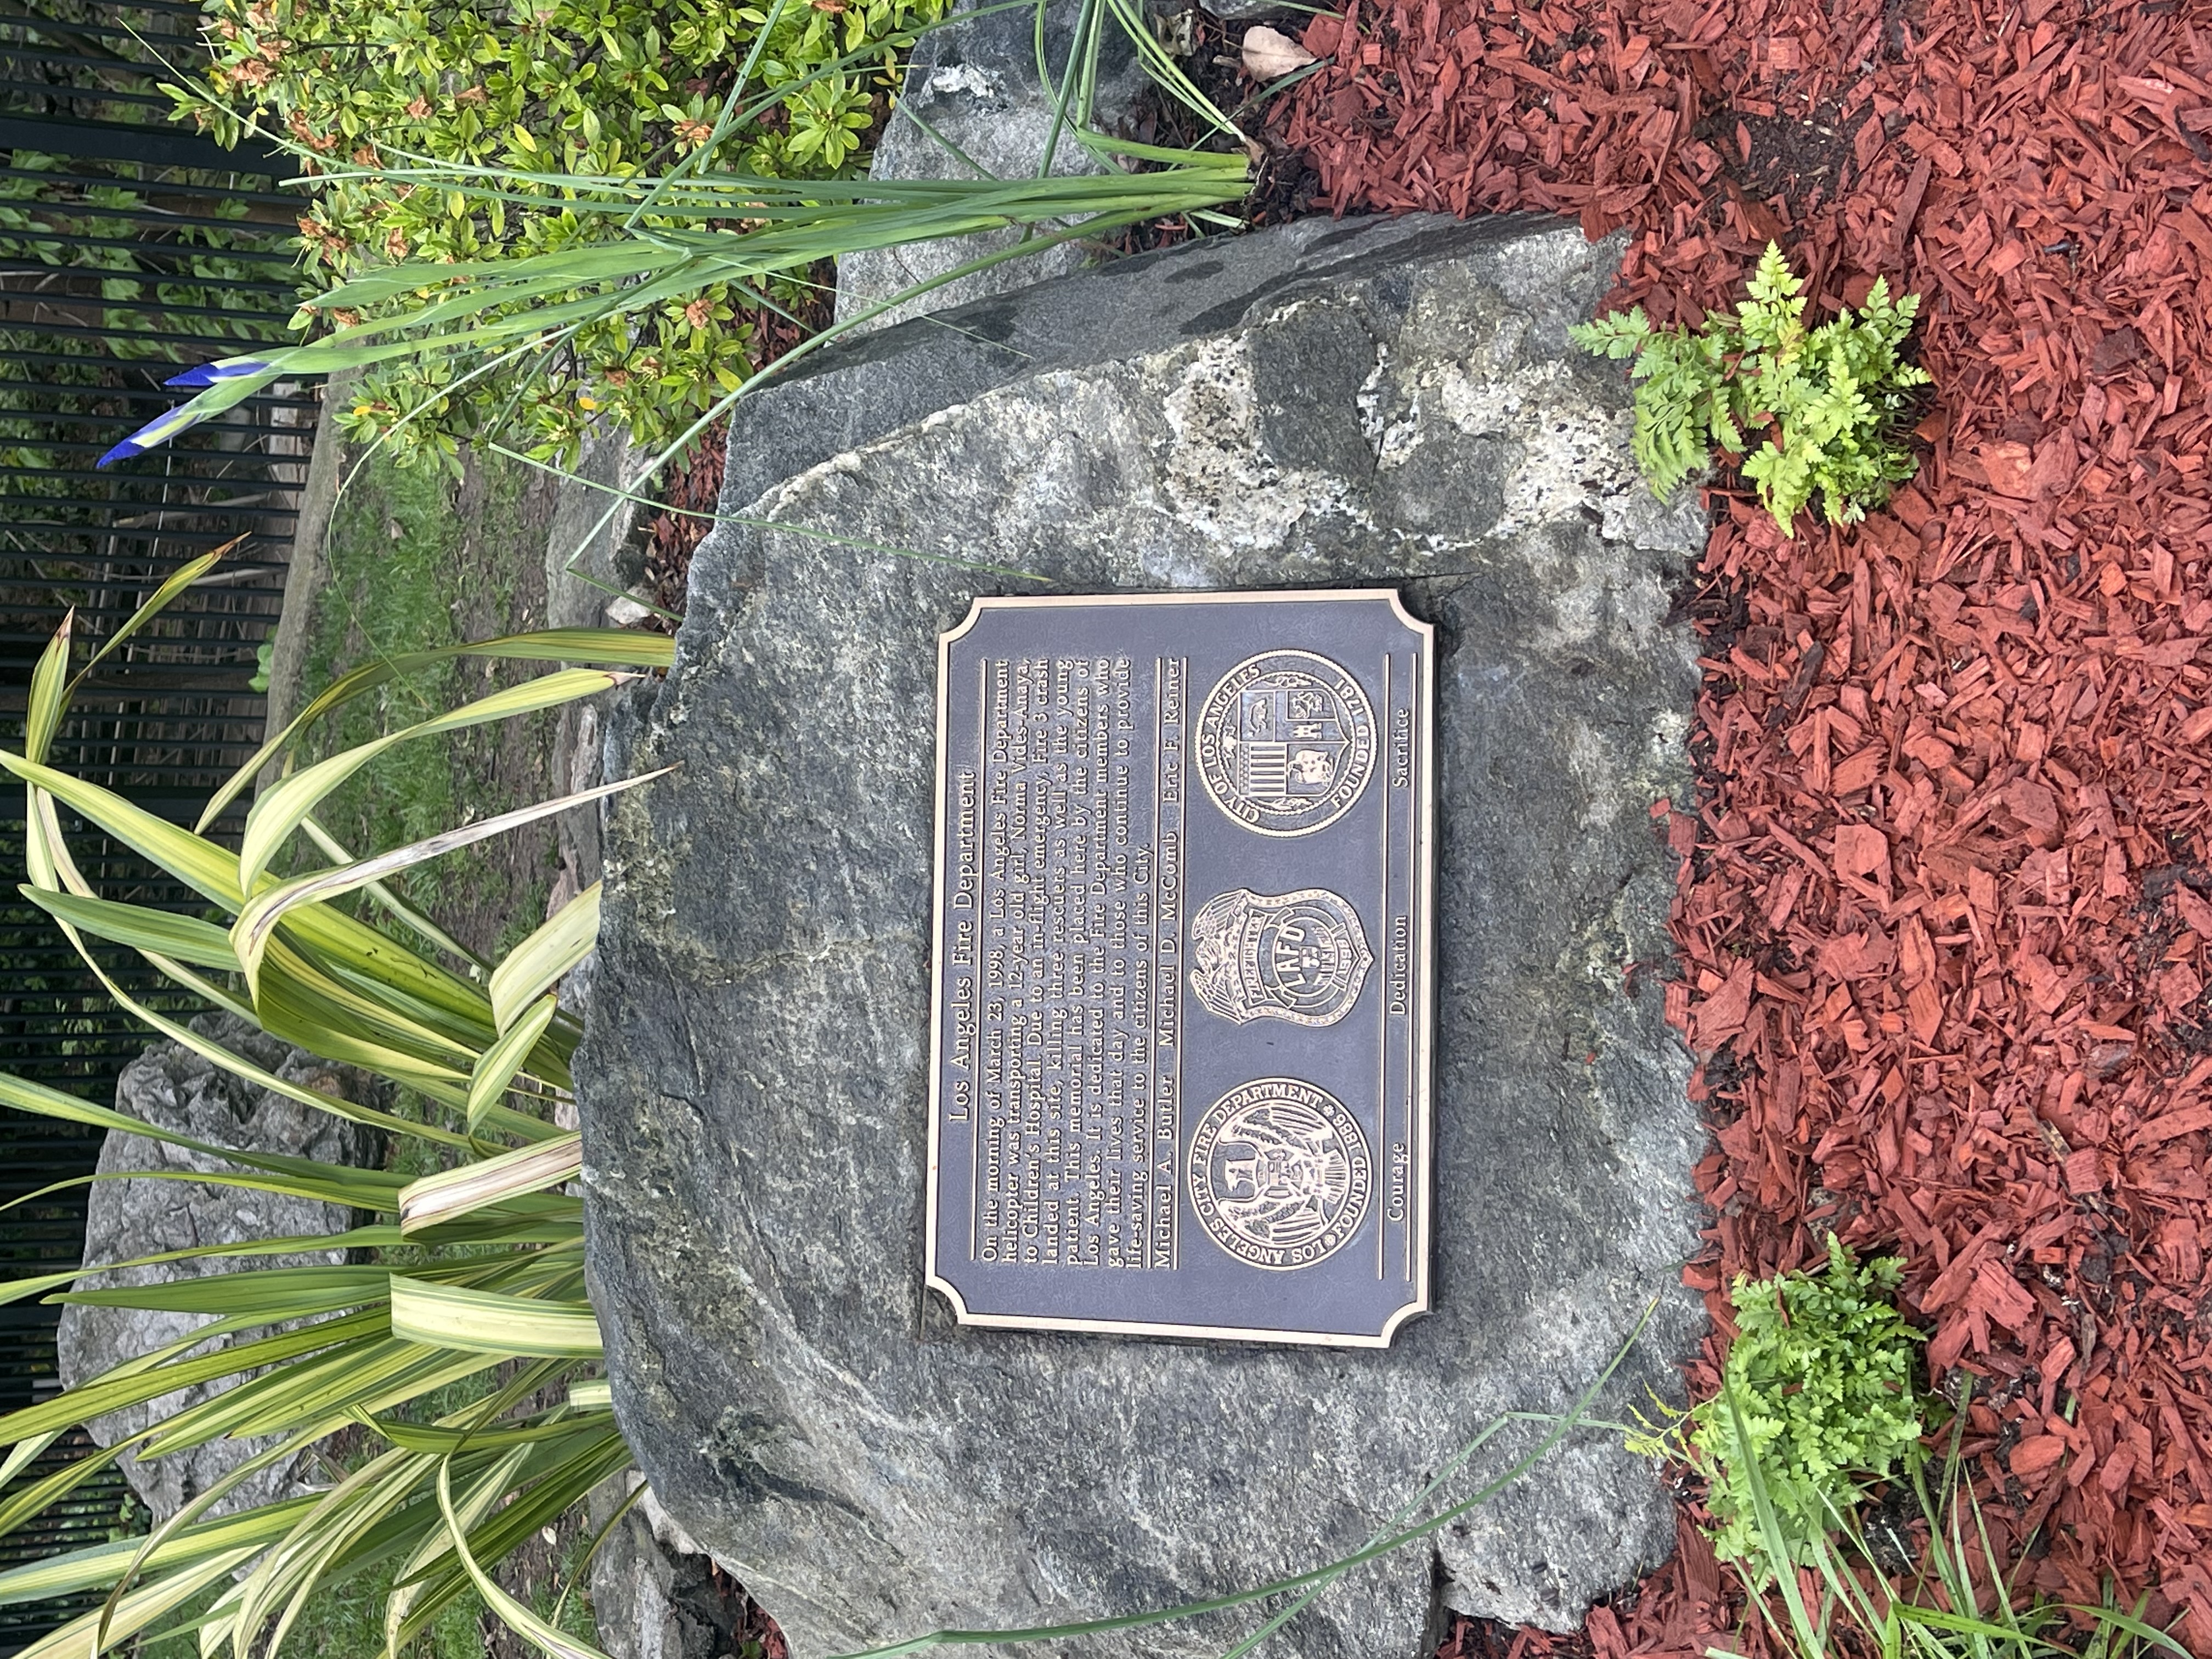 Plaque honoring those who died show in the landscaped area